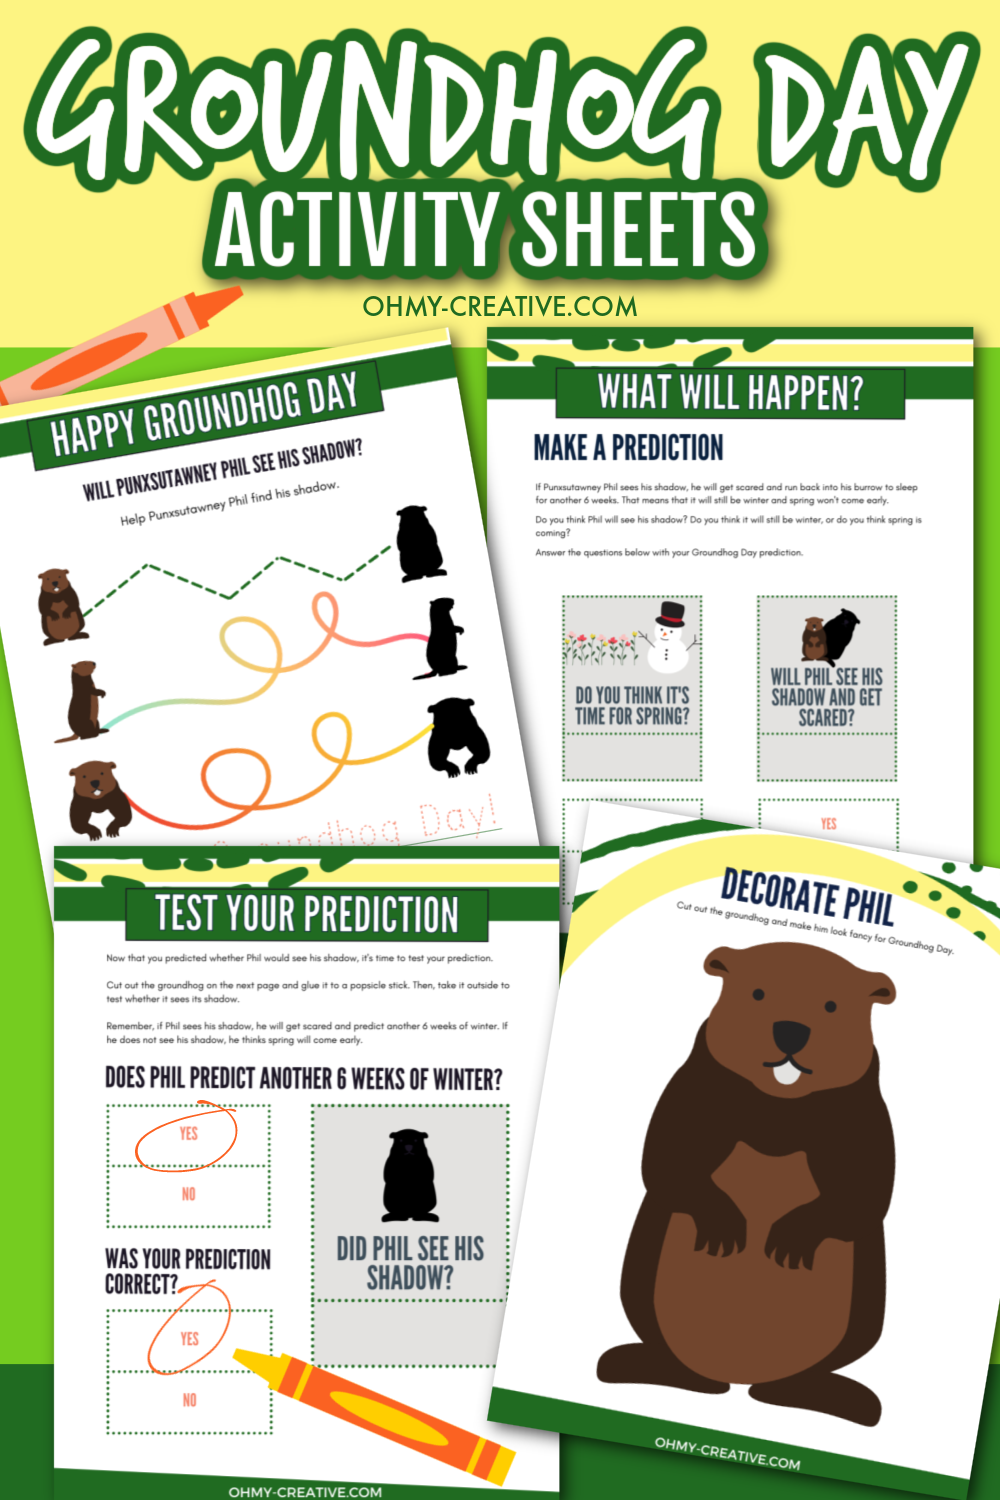 Groundhog Day Activity Sheets - OhMy-Creative Shop